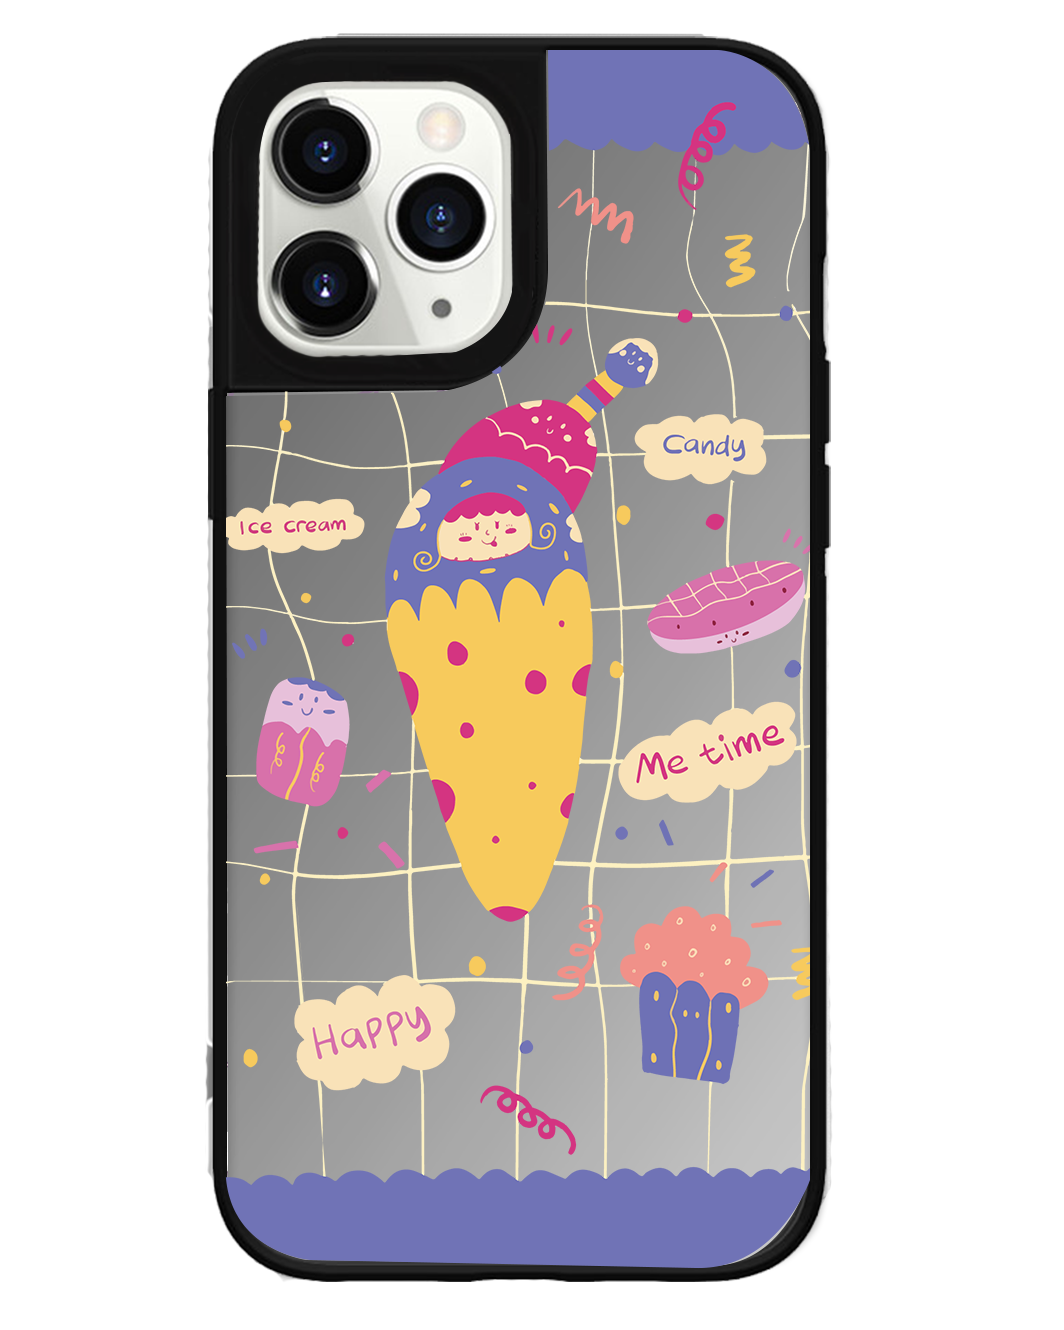 iPhone Mirror Grip Case - Candy Doodle